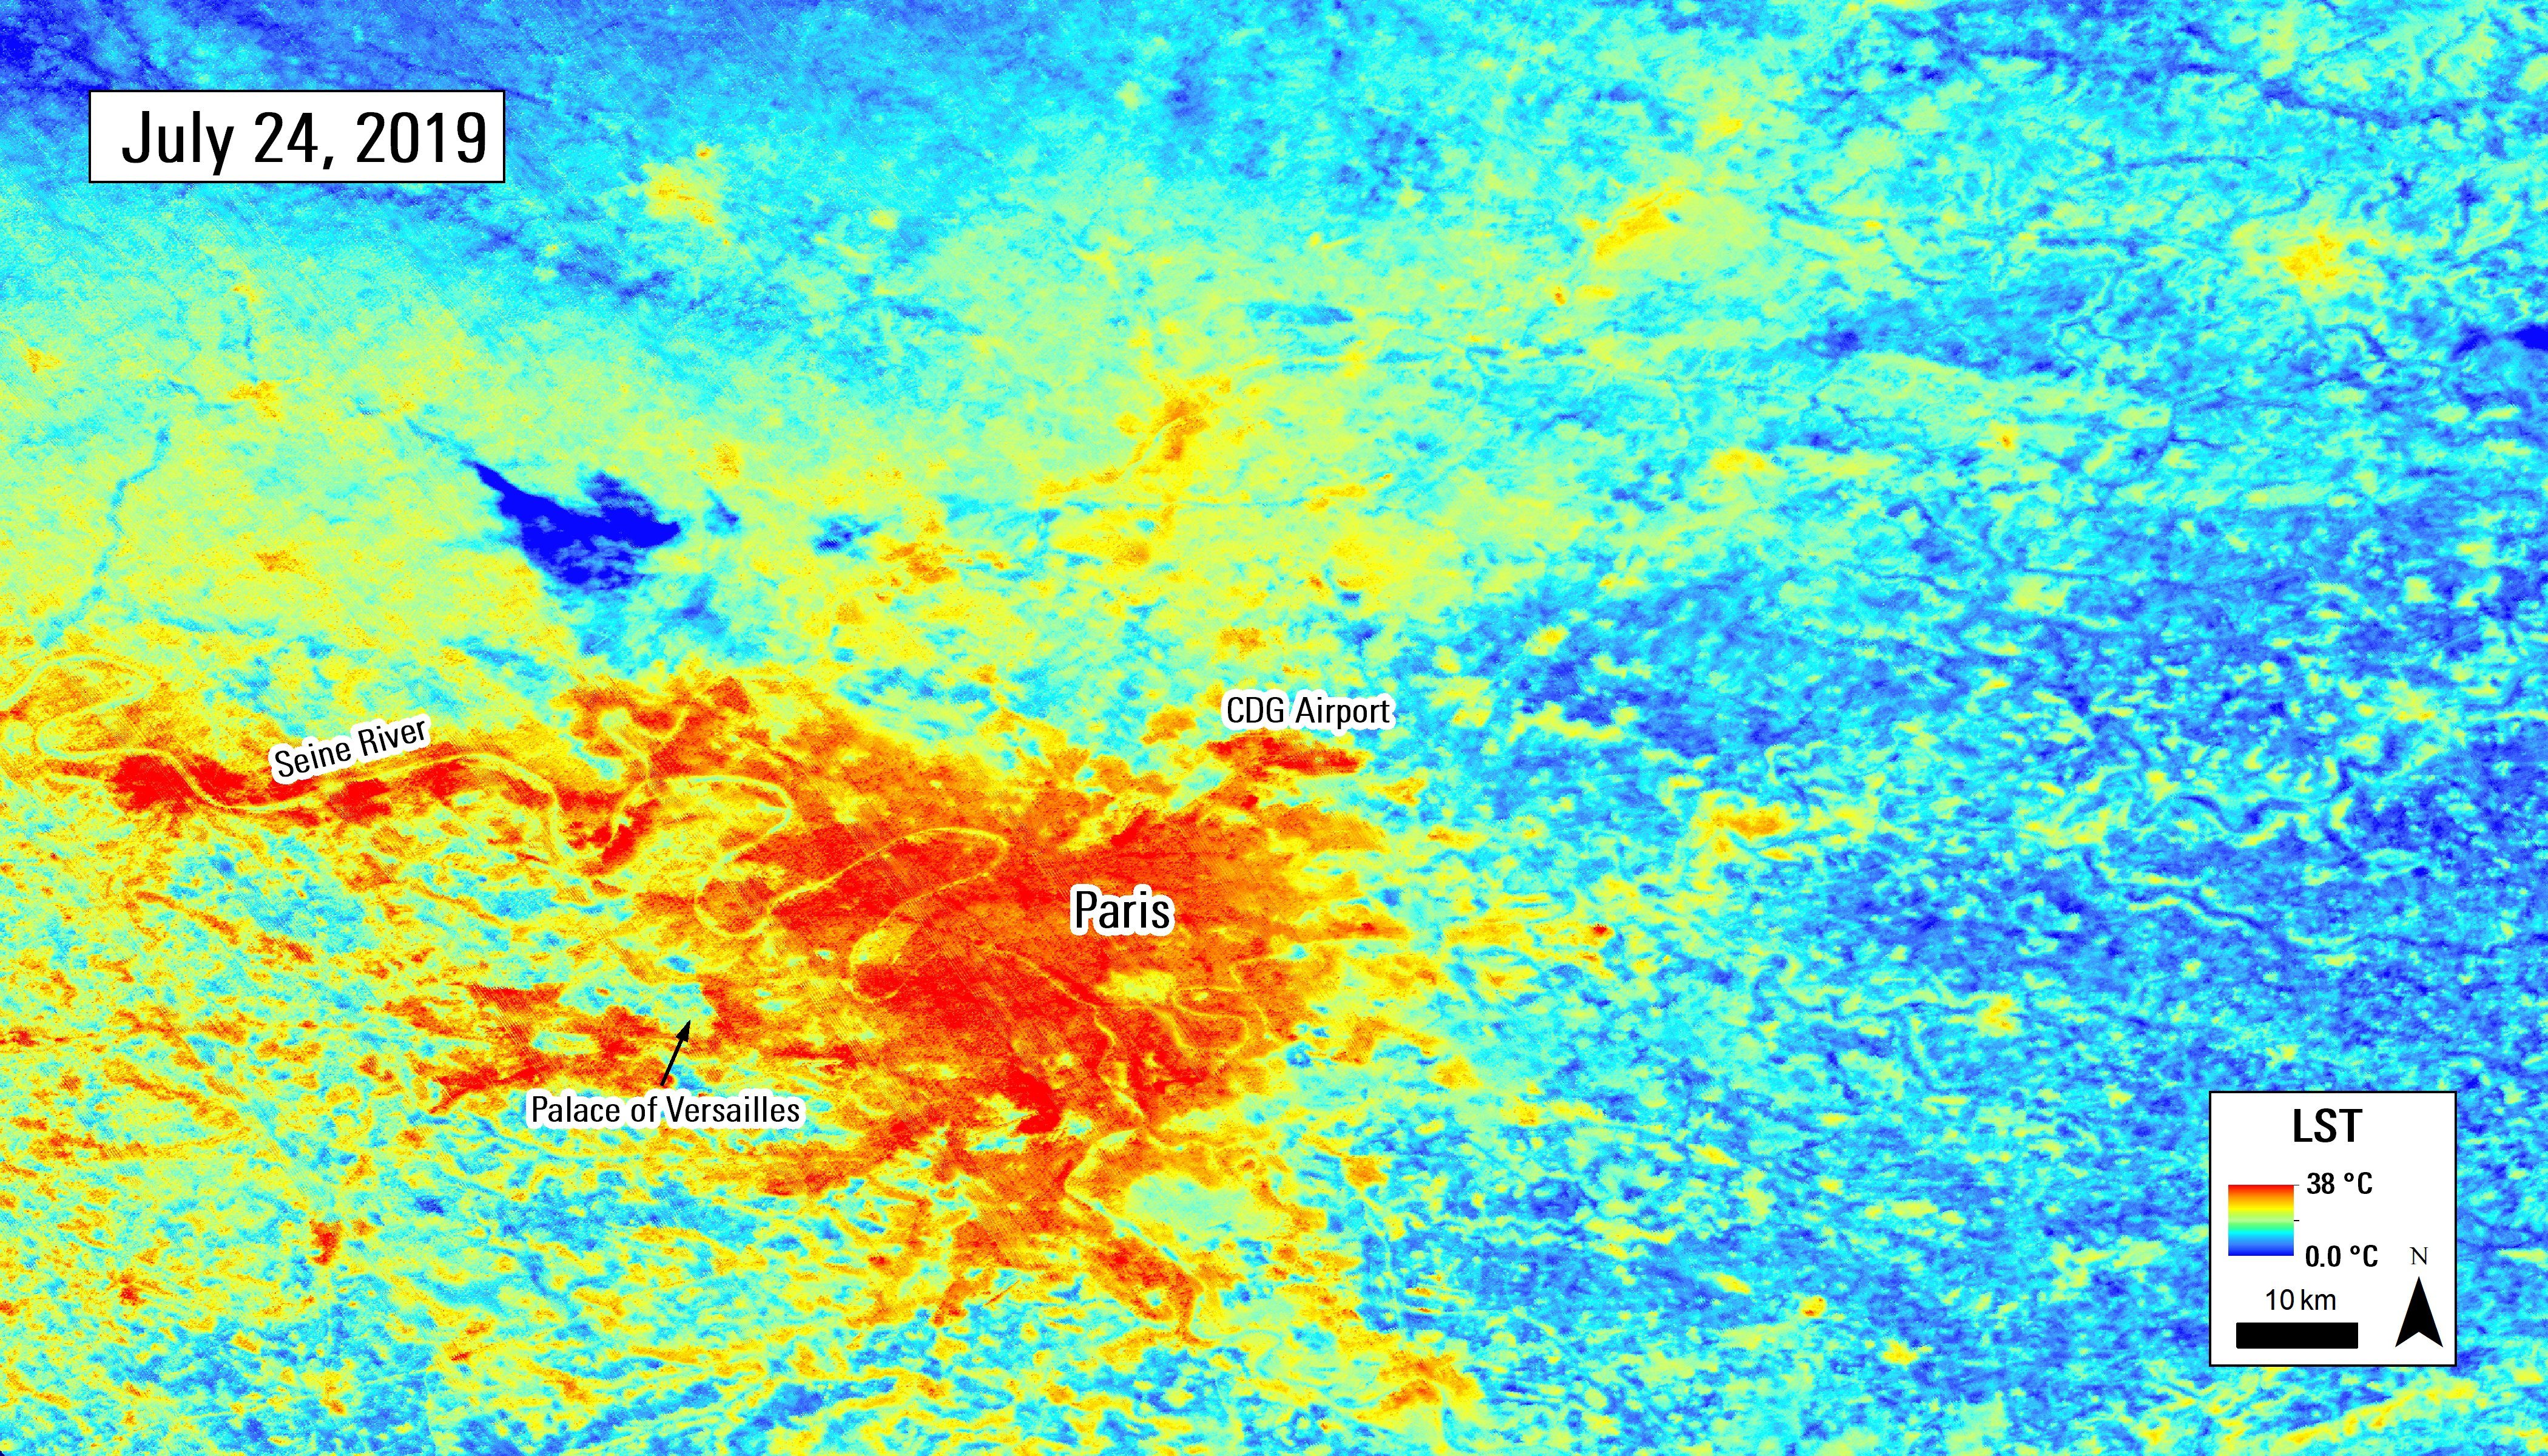 ECOSTRESS Land Surface Temperature observation over Paris, France, acquired on July 24, 2019.